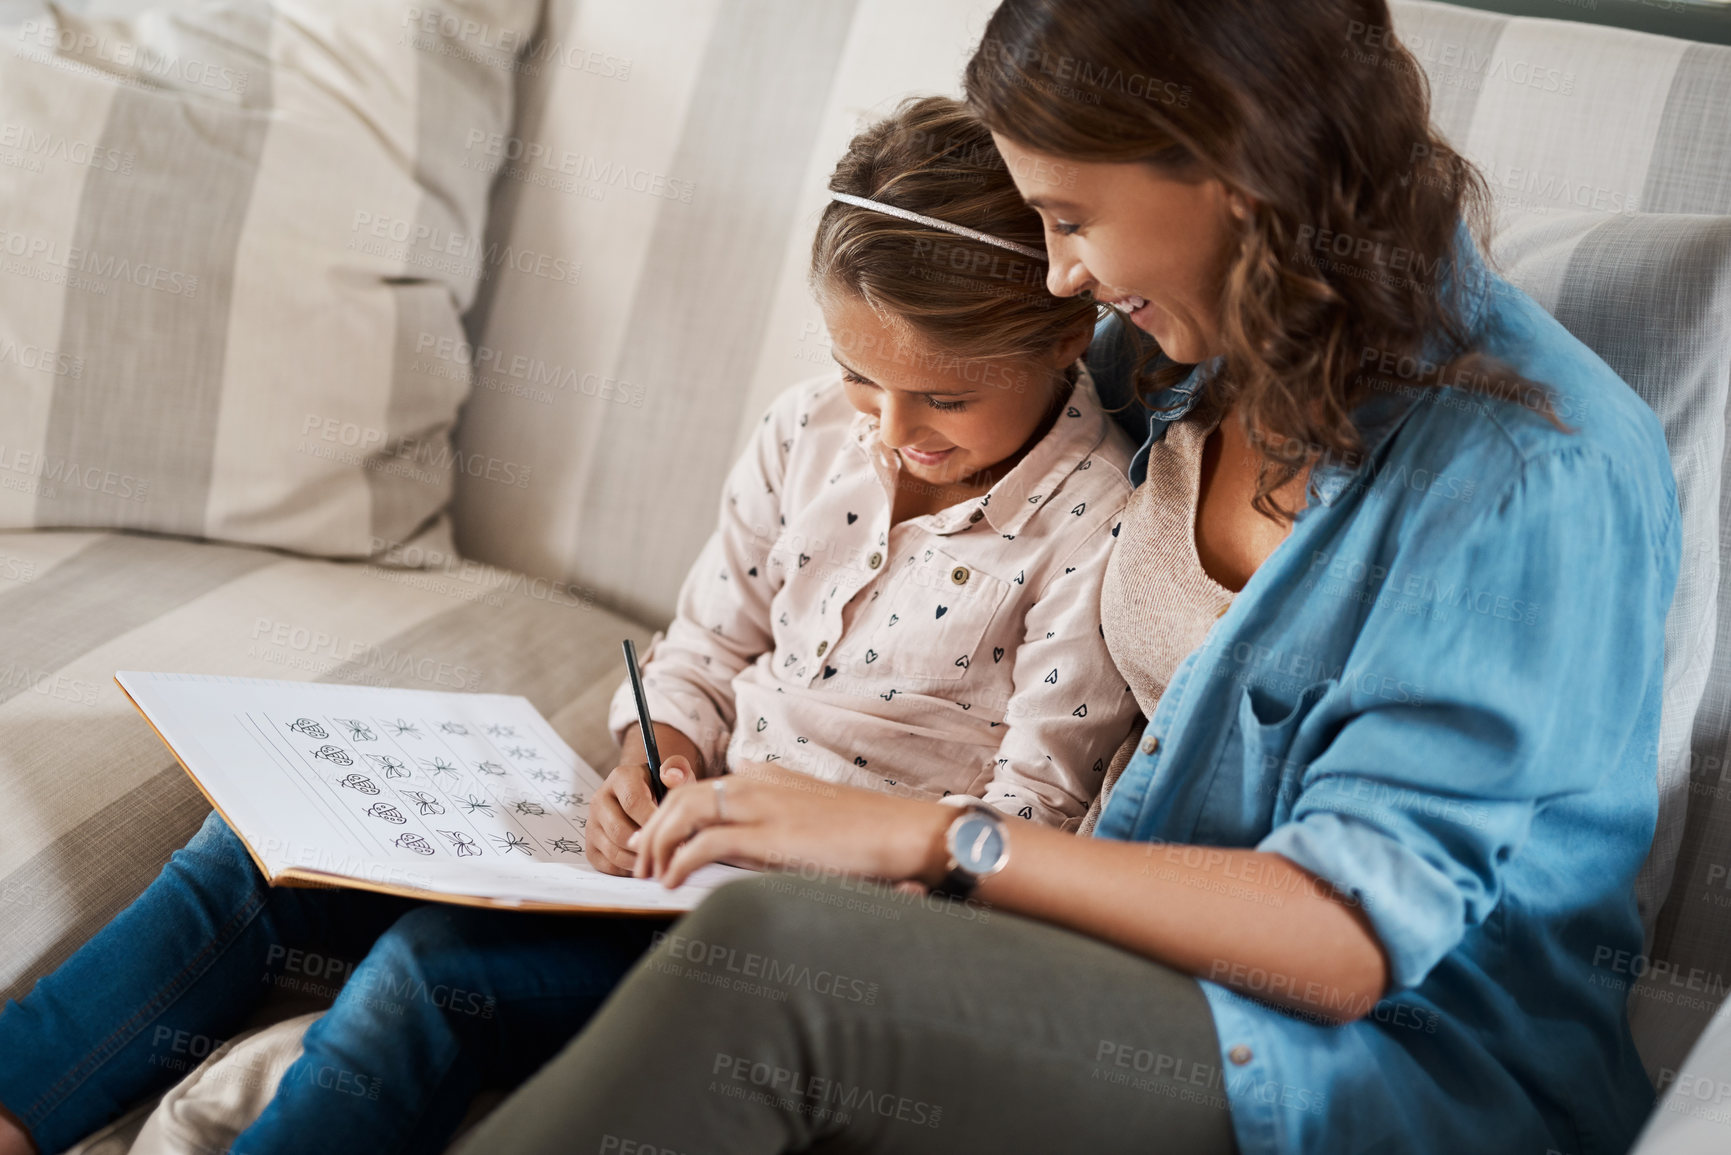 Buy stock photo Shot of a young woman helping her adorable daughter with her homework at home